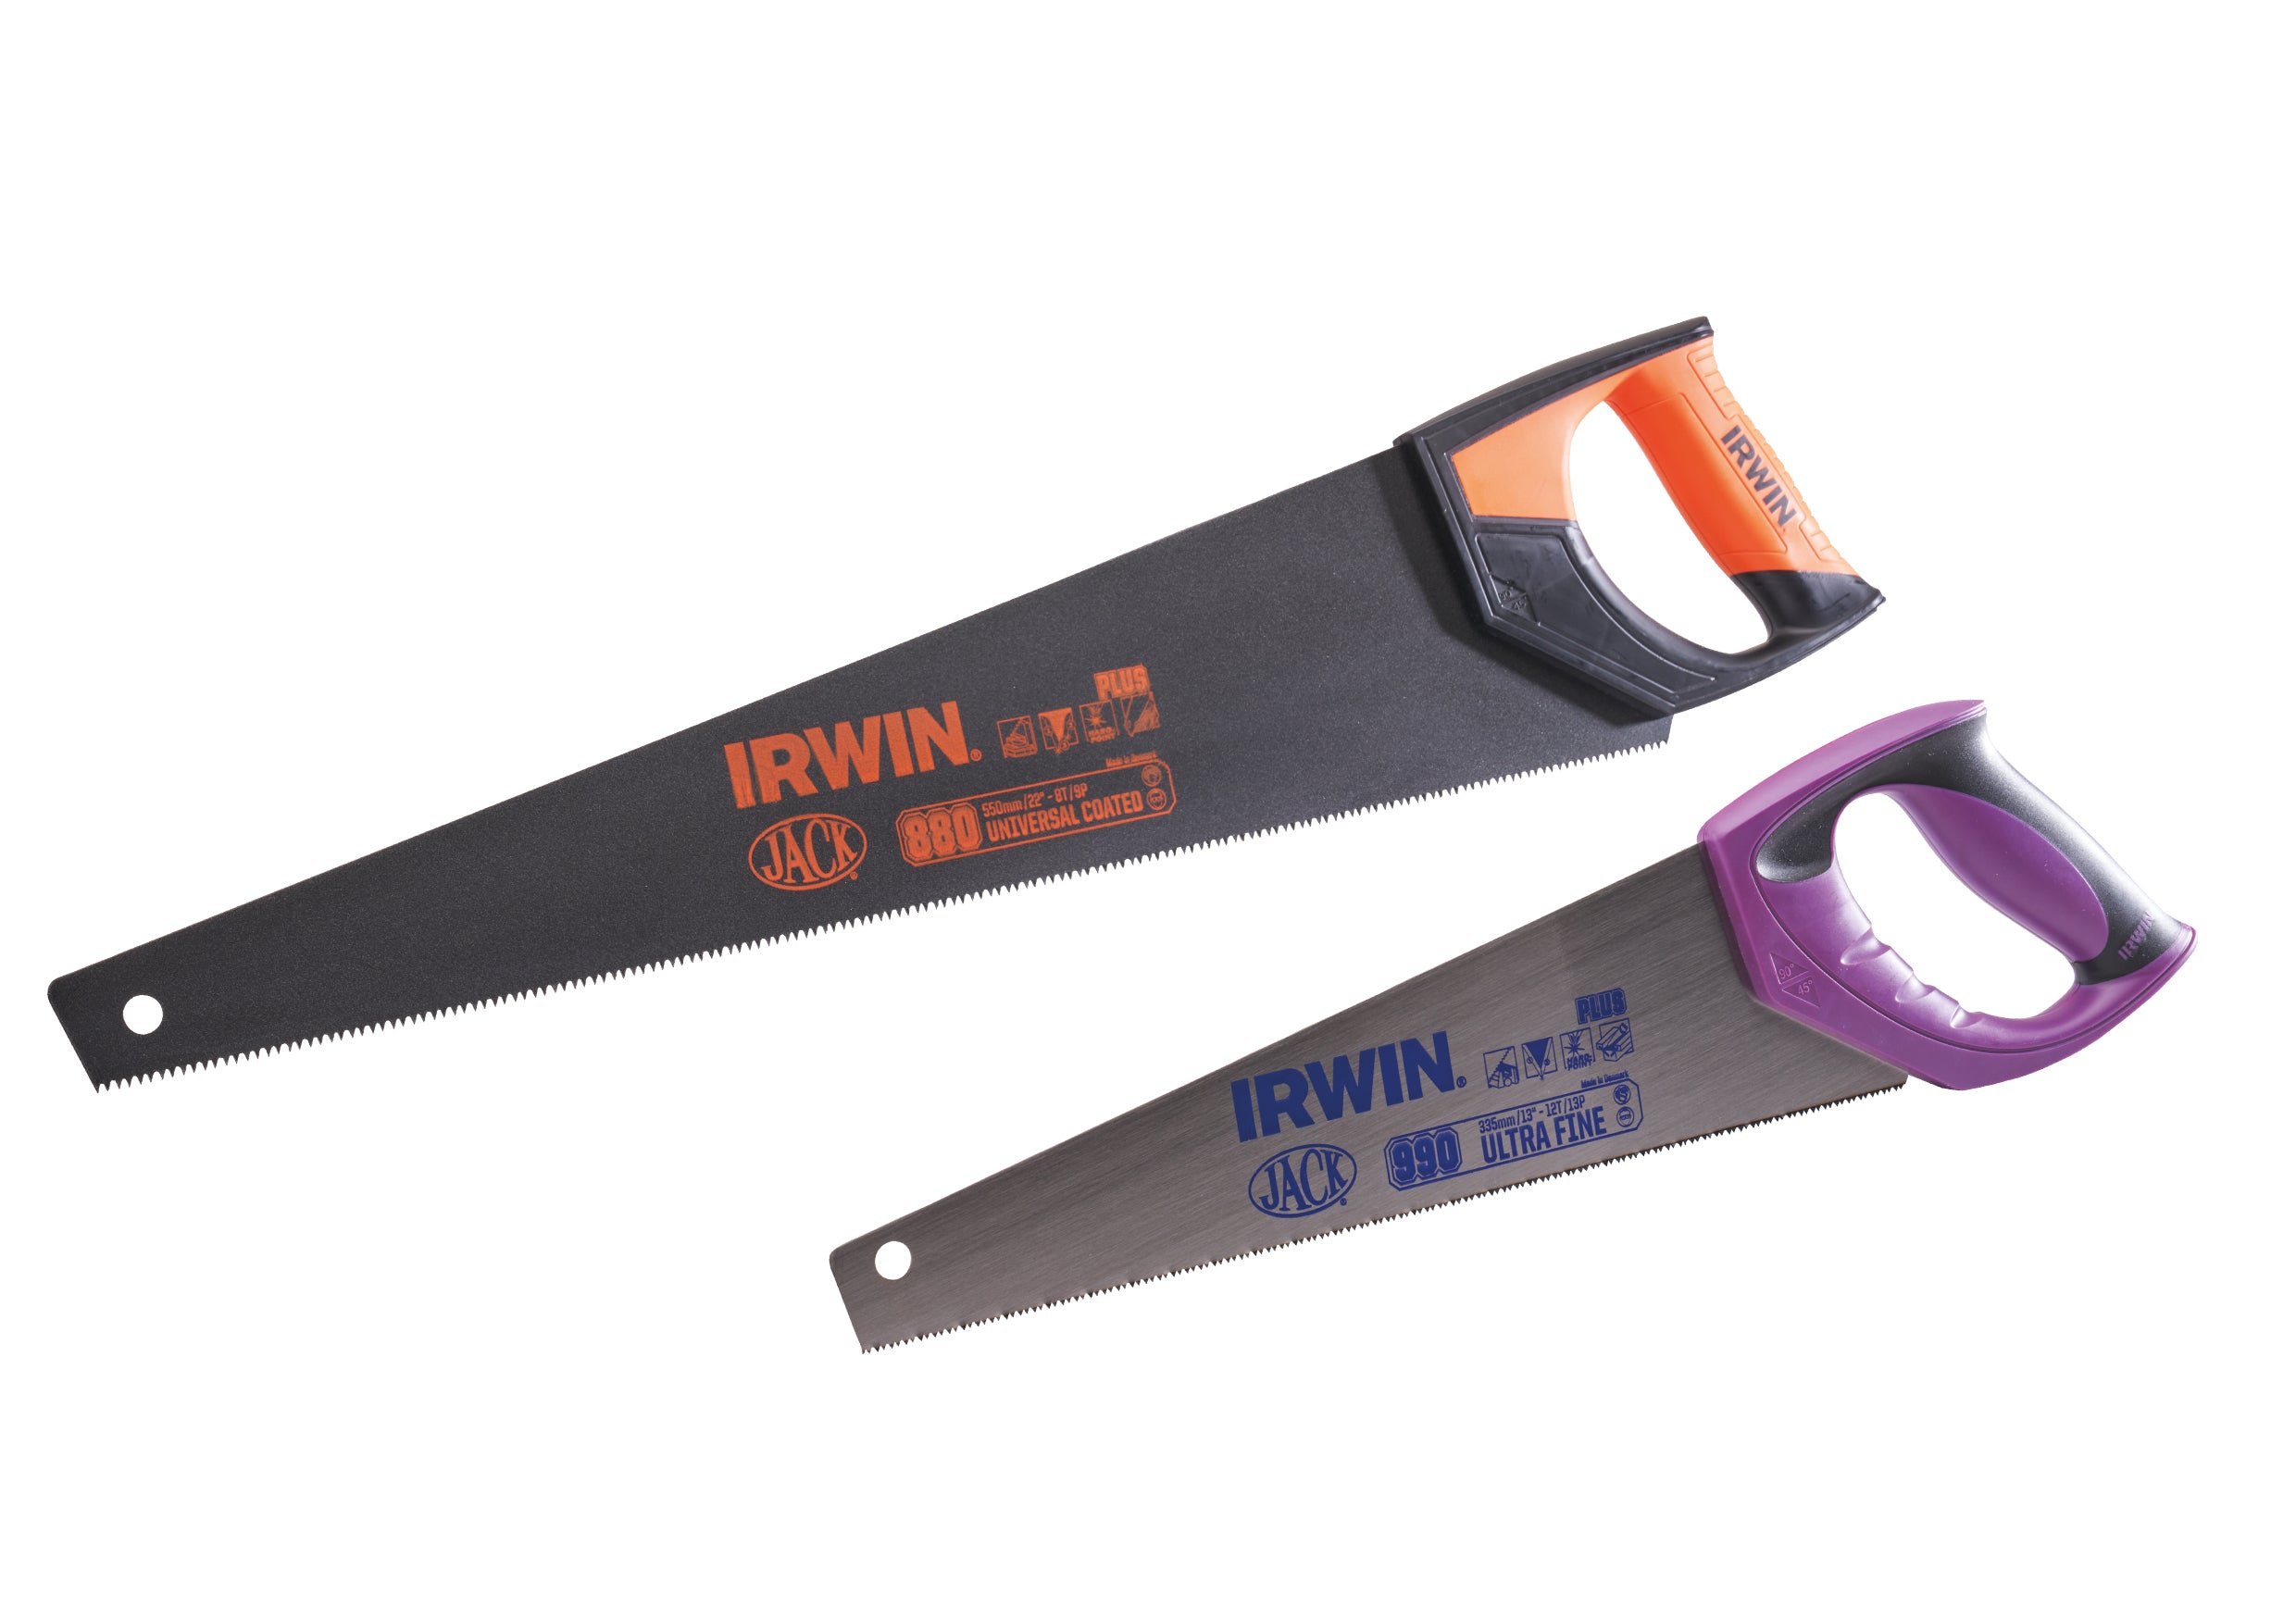 XMS IRWIN Jack 880 Coated Saw with Toolbox Saw